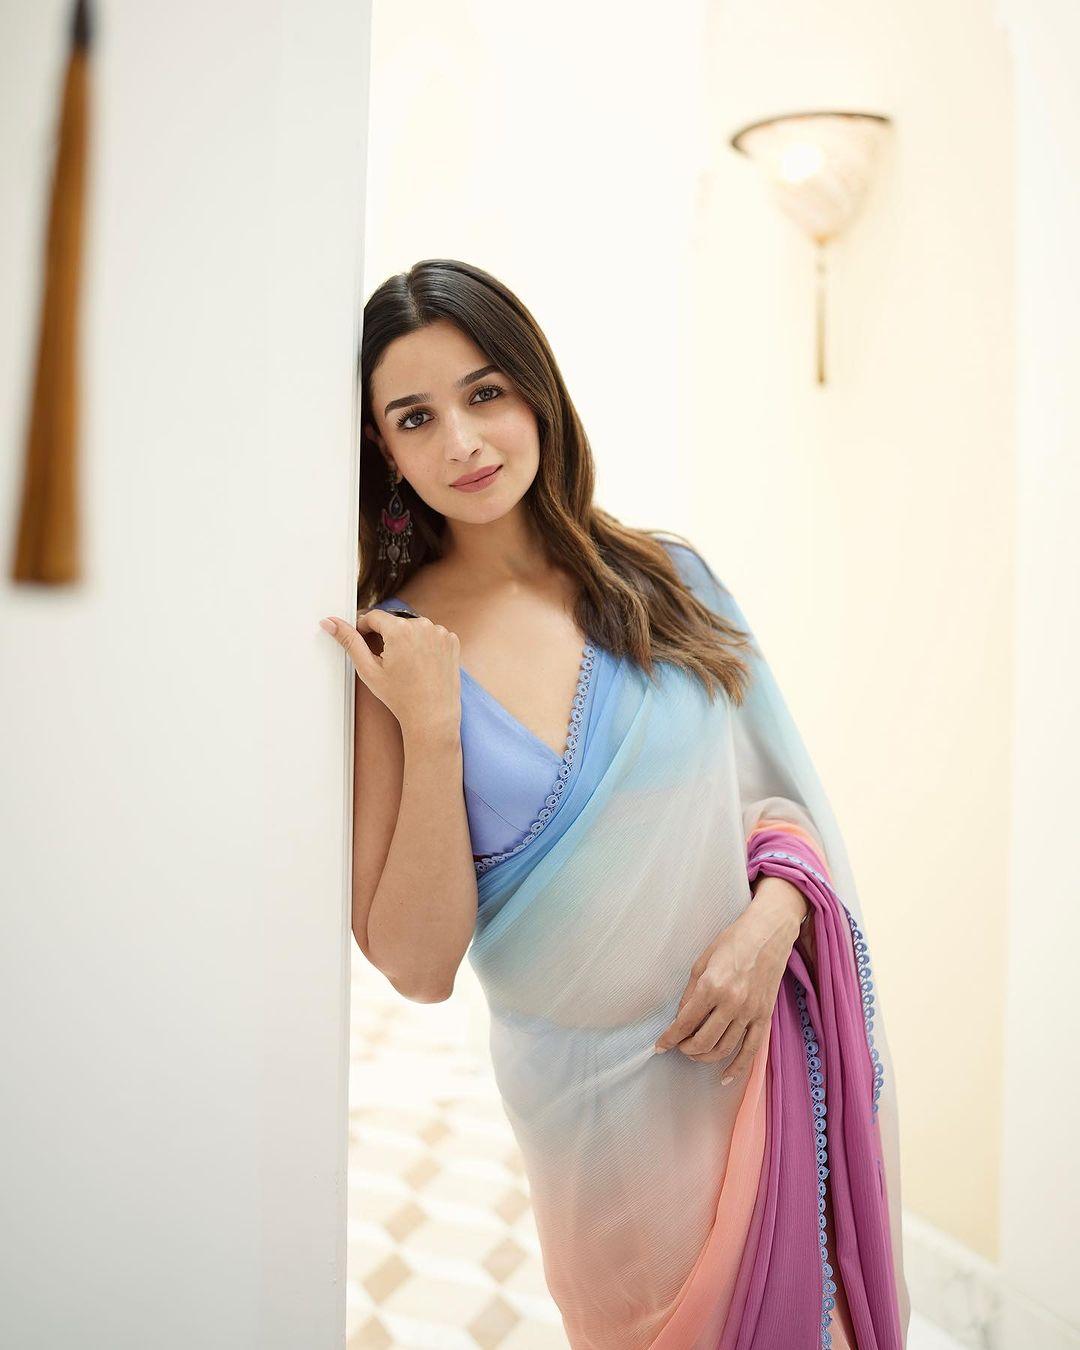 Attending a friend's wedding comes with many responsibilities, and looking picture-perfect is one of them. Choose Alia's multicolored saree for a comfortable and glamorous look